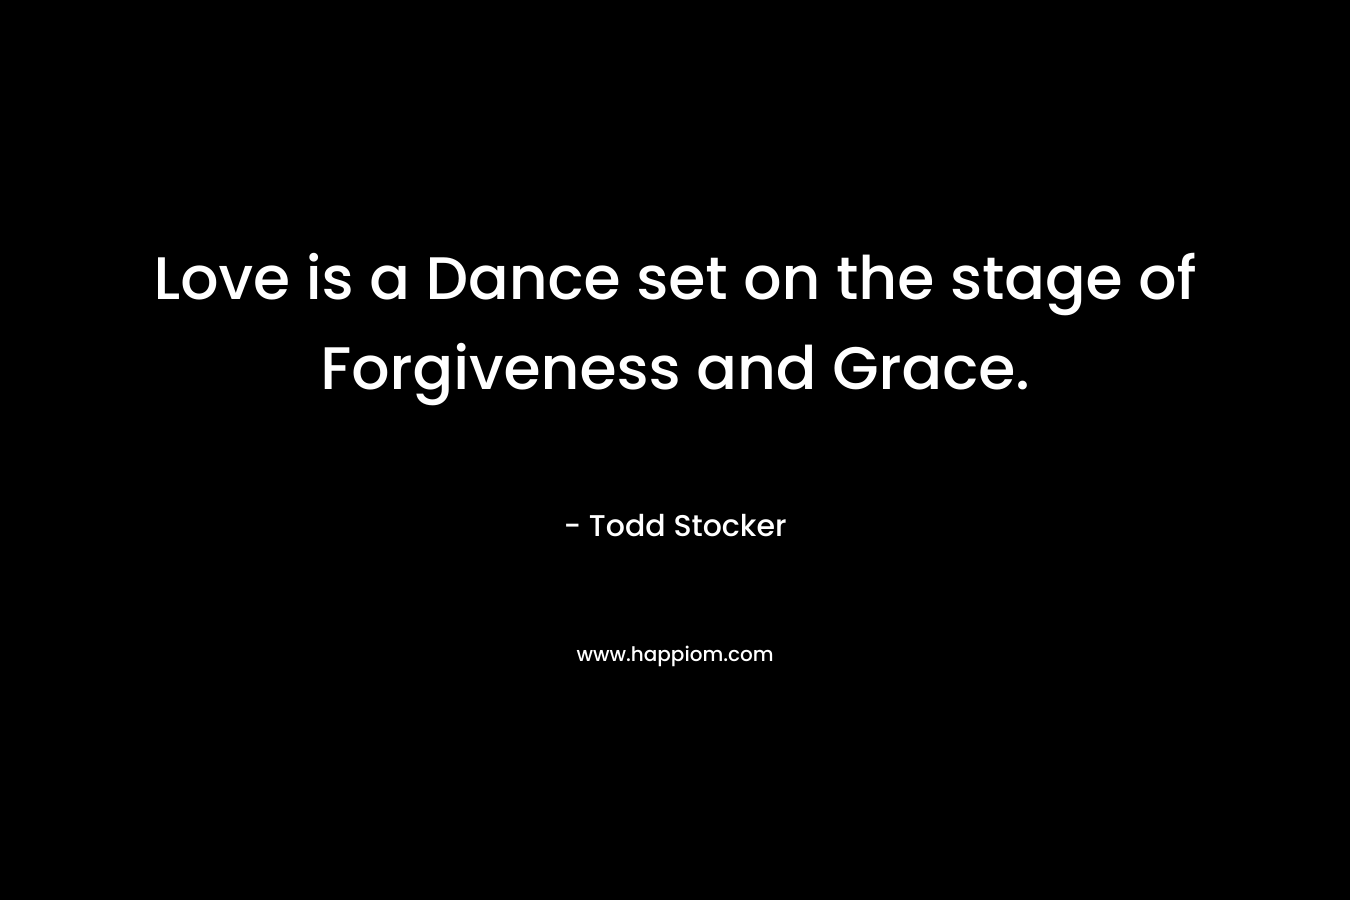 Love is a Dance set on the stage of Forgiveness and Grace.